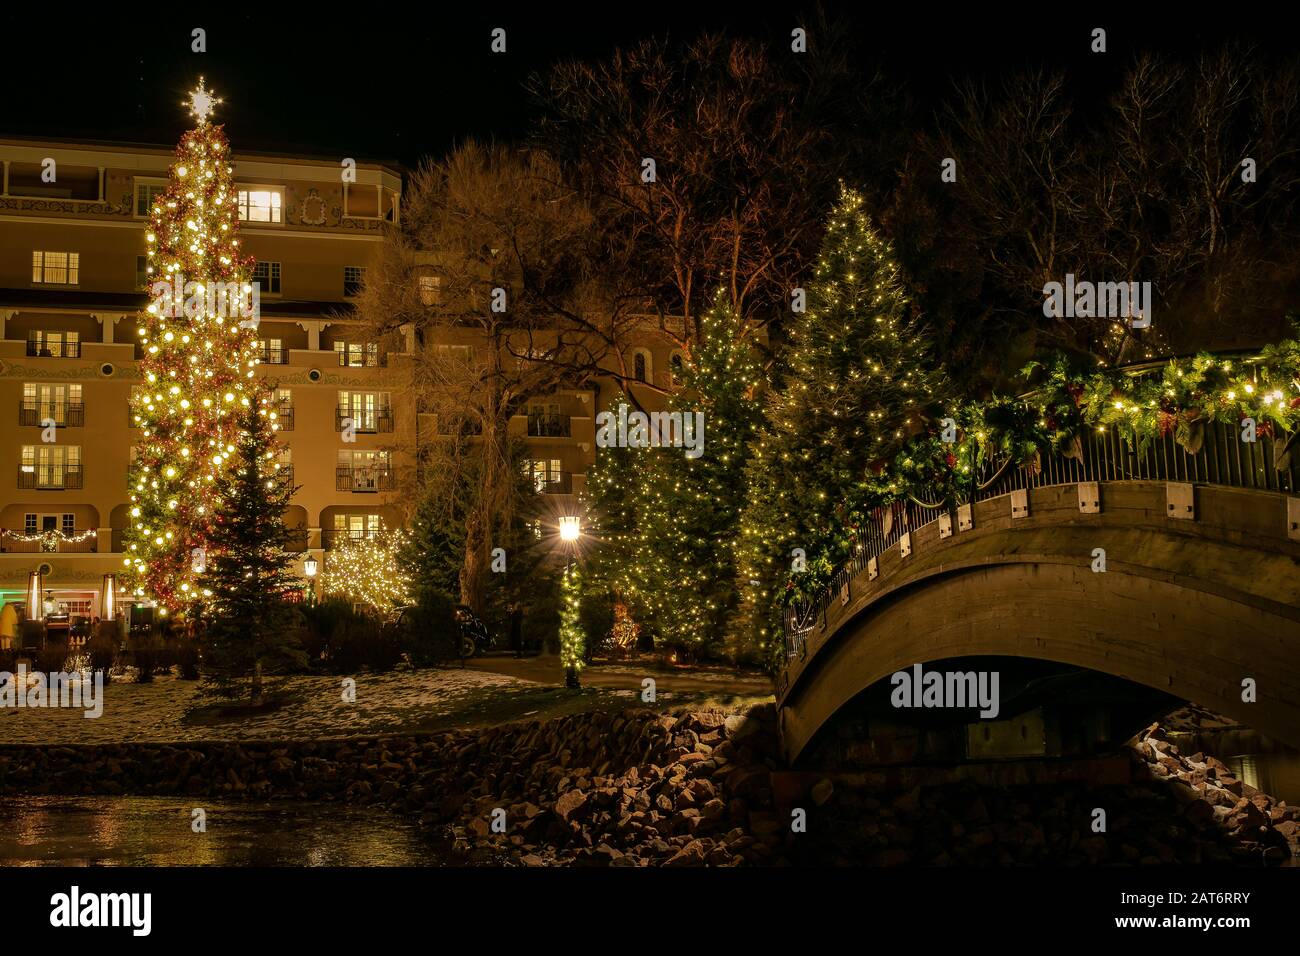 The Broadmoor Hotel in Colorado Springs, CO, is a popular destination at Christmas known for its beautiful grounds and festive light displays. Stock Photo